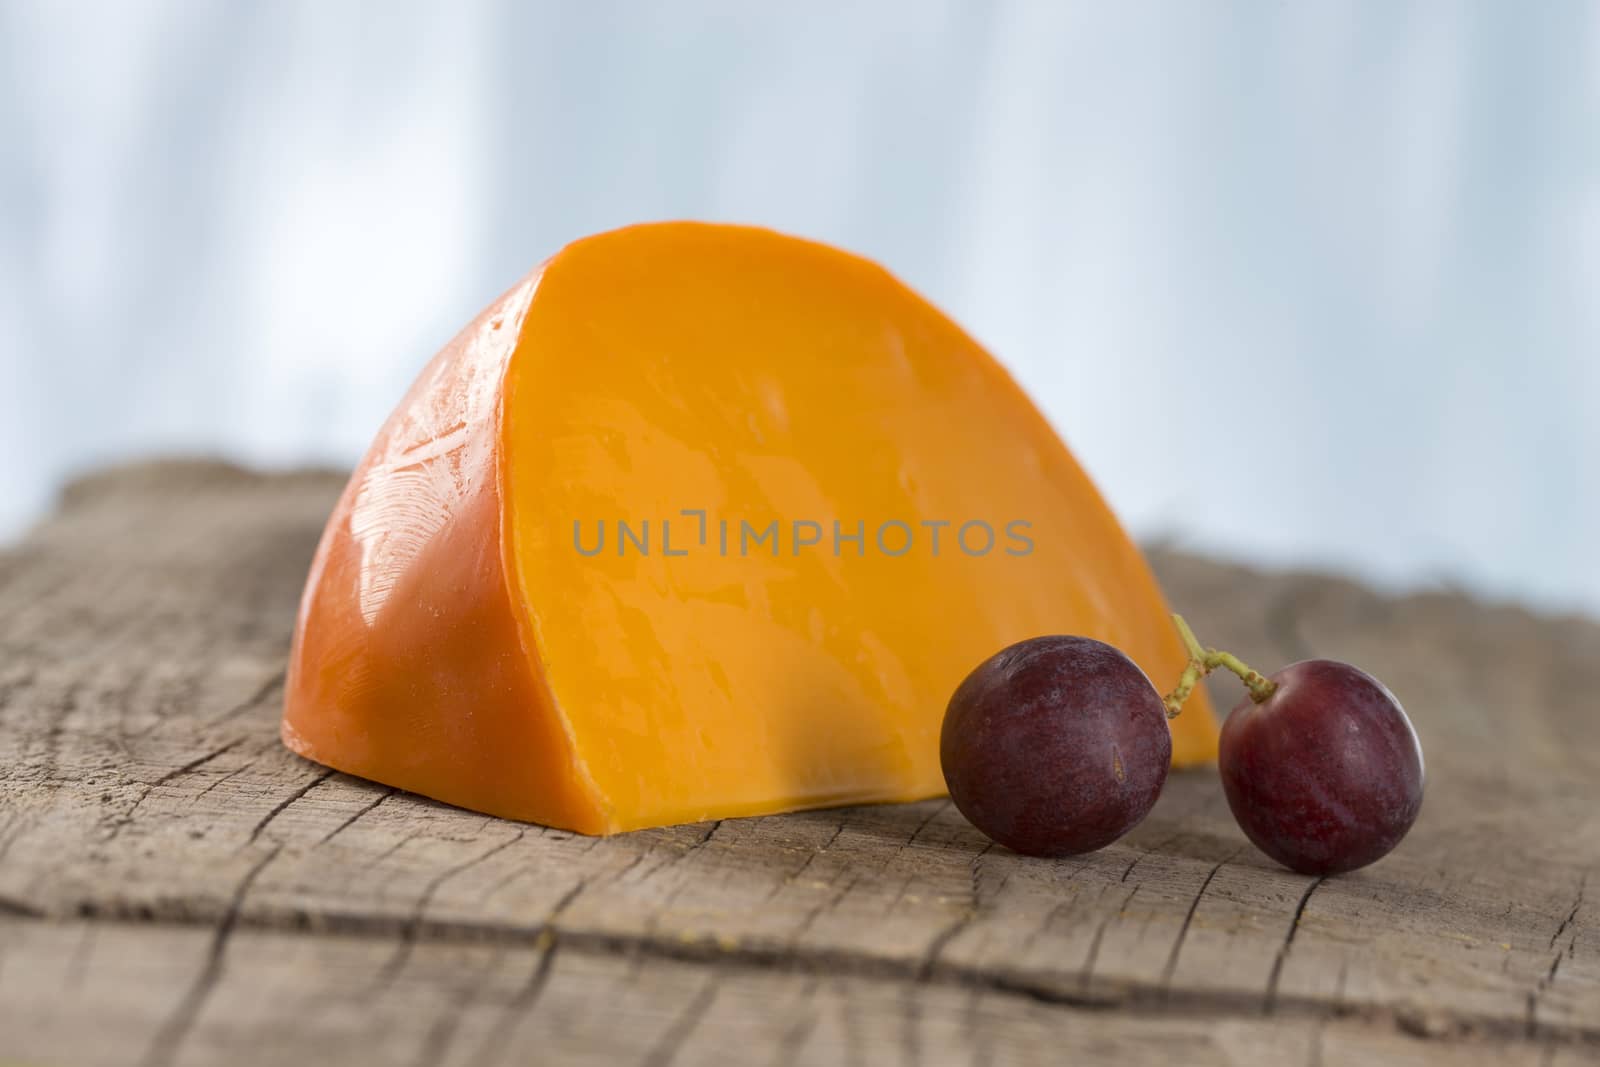 Hollander cheese - portion of Mimolette